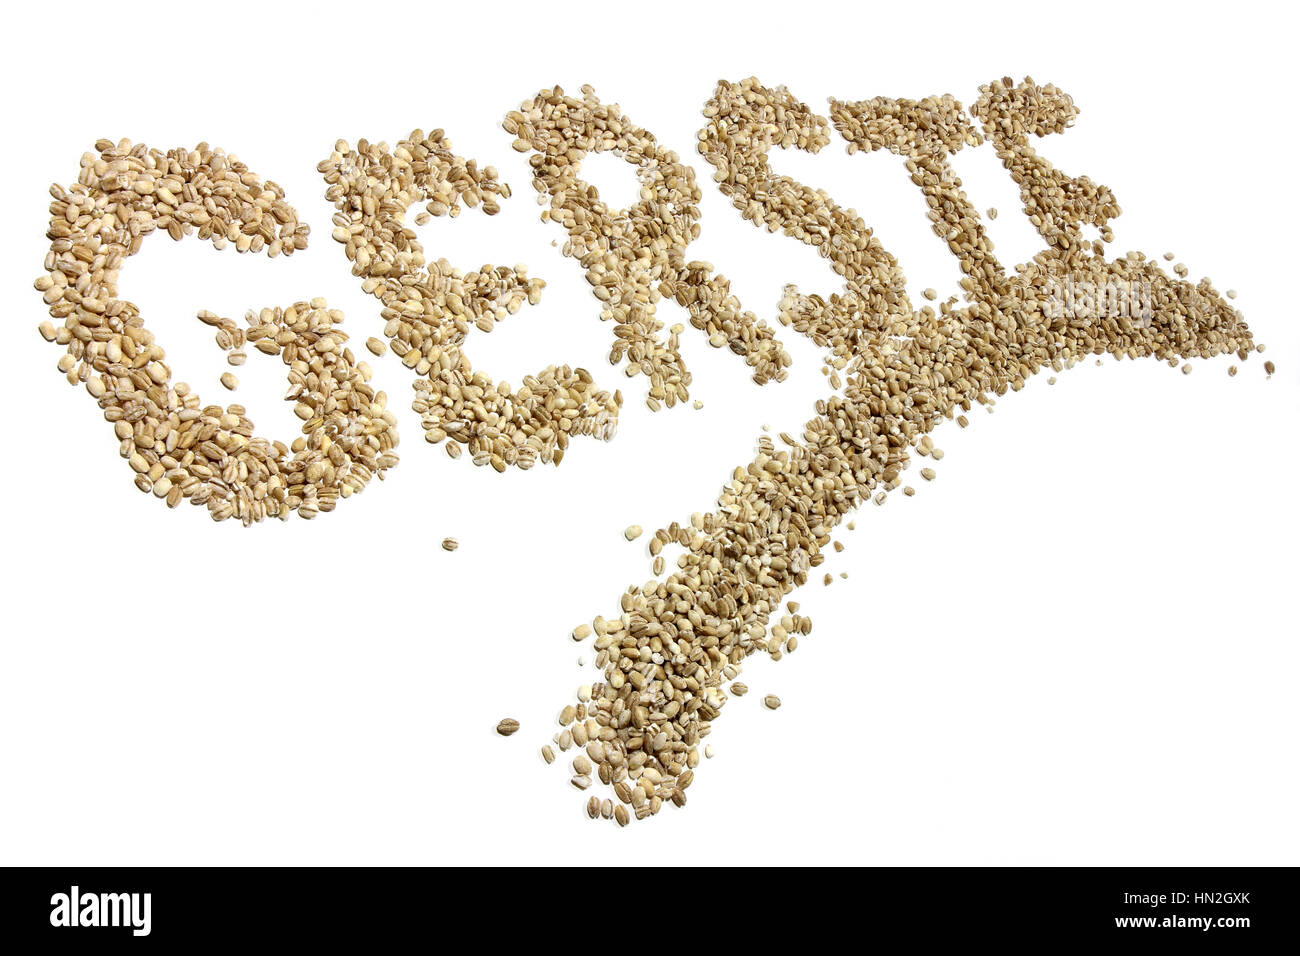 GERSTE (barley in German language) written with barley grains isolated on white background Stock Photo